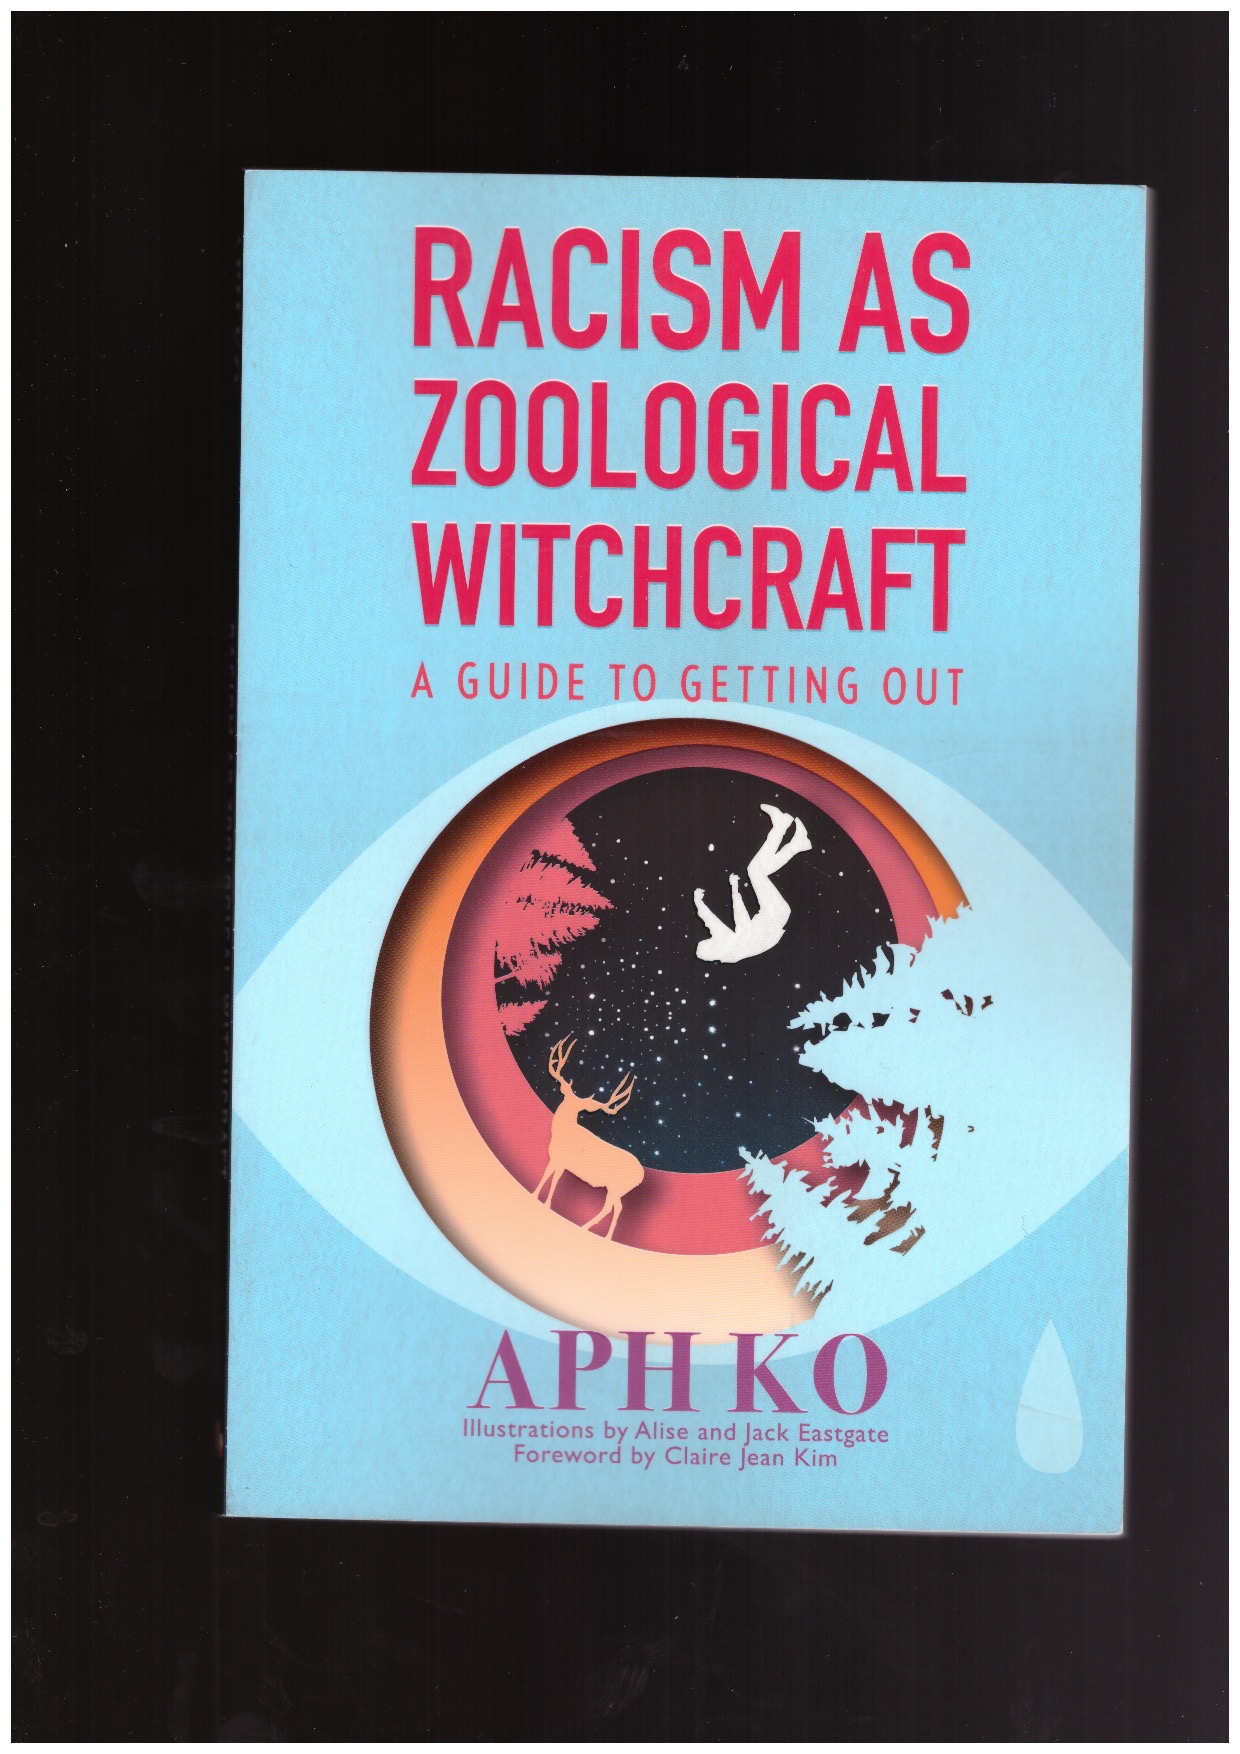 KO, Aph - Racism as Zoological Witchcraft